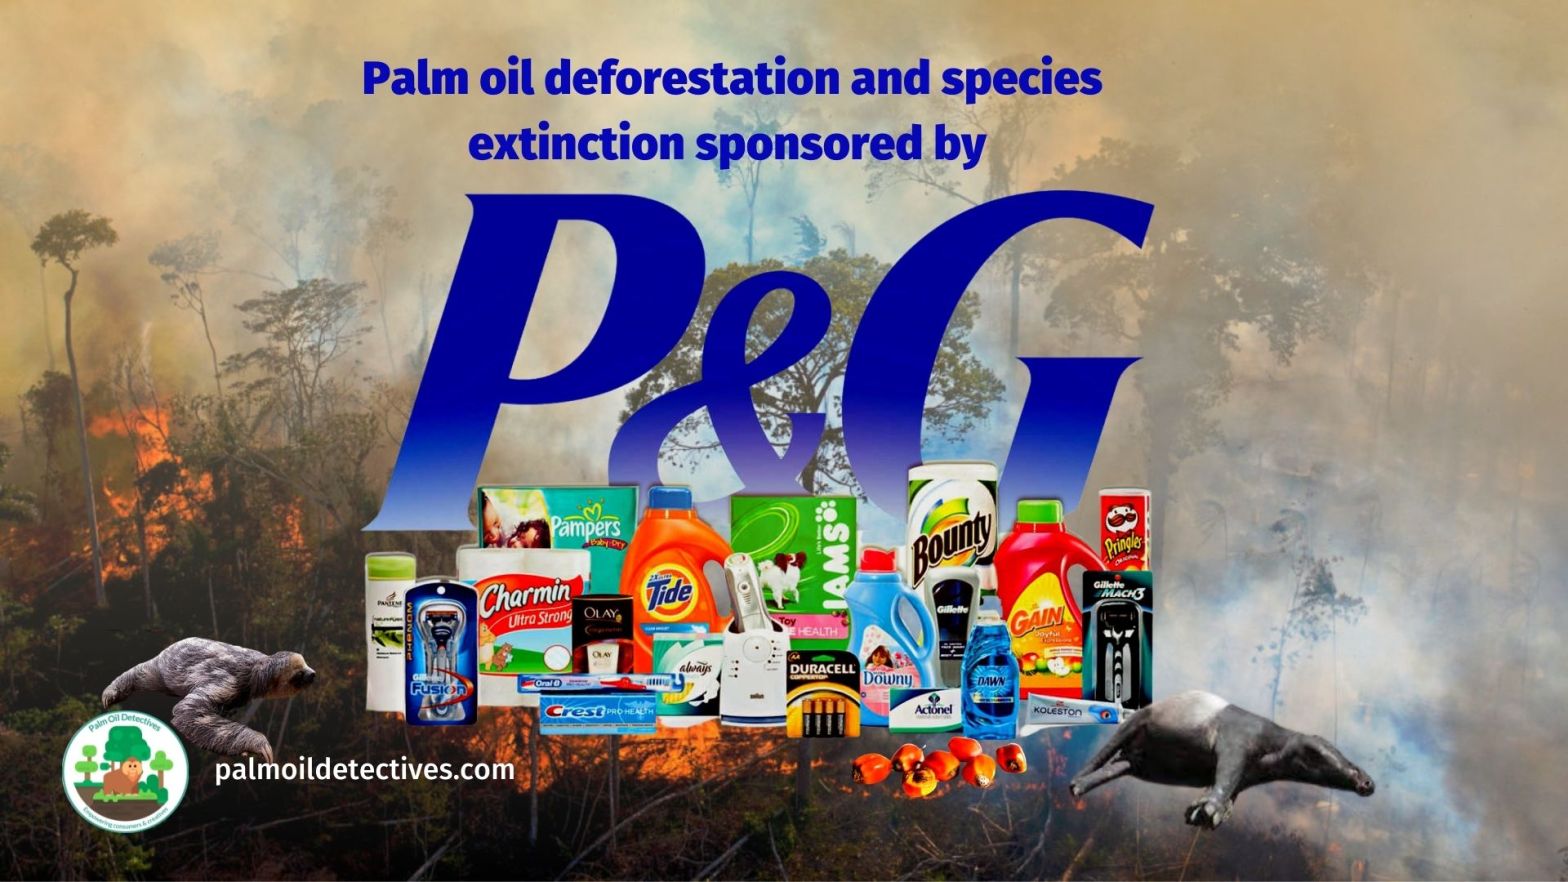 Boycott Procter & Gamble because their products contain palm oil linked to deforestation and species extinction #Boycottpalmoil #Boycott4Wildlife